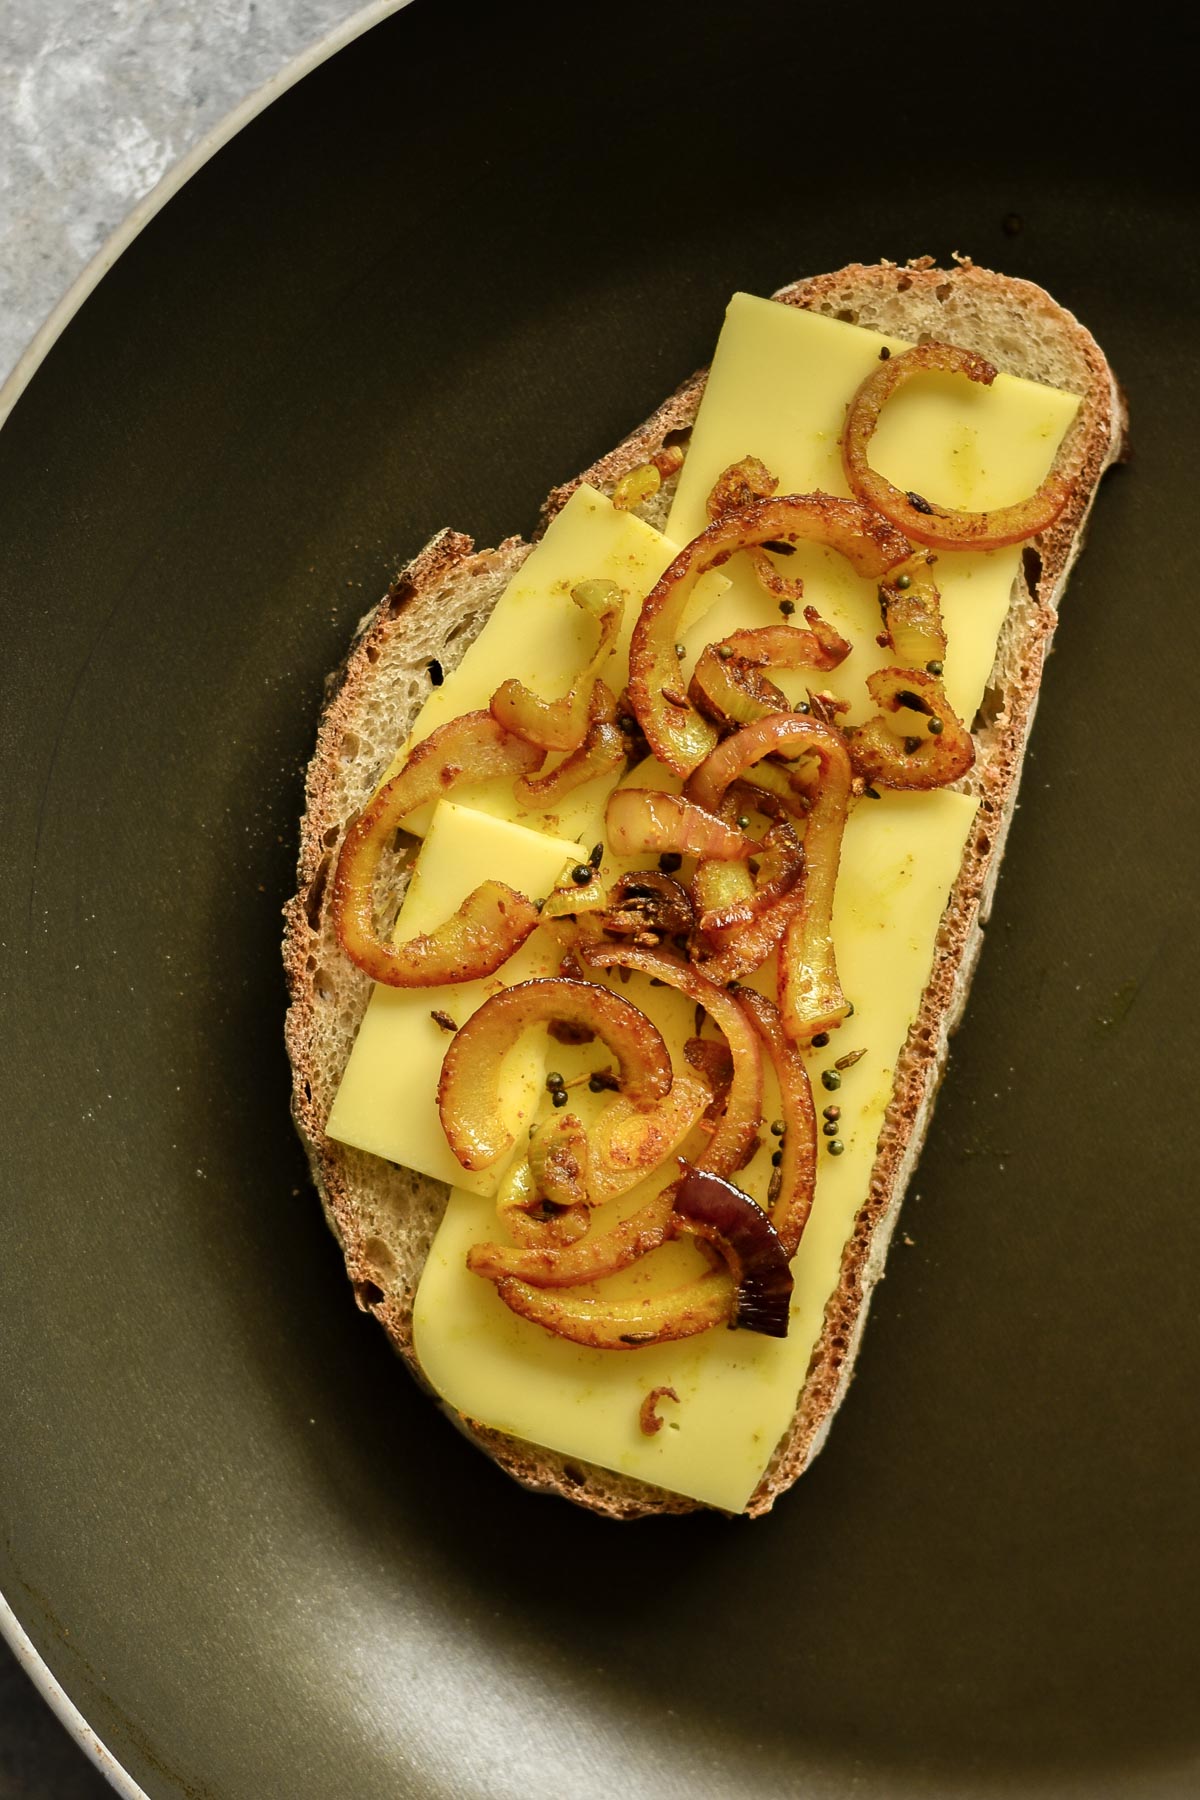 sourdough bread, cheese and spiced onions